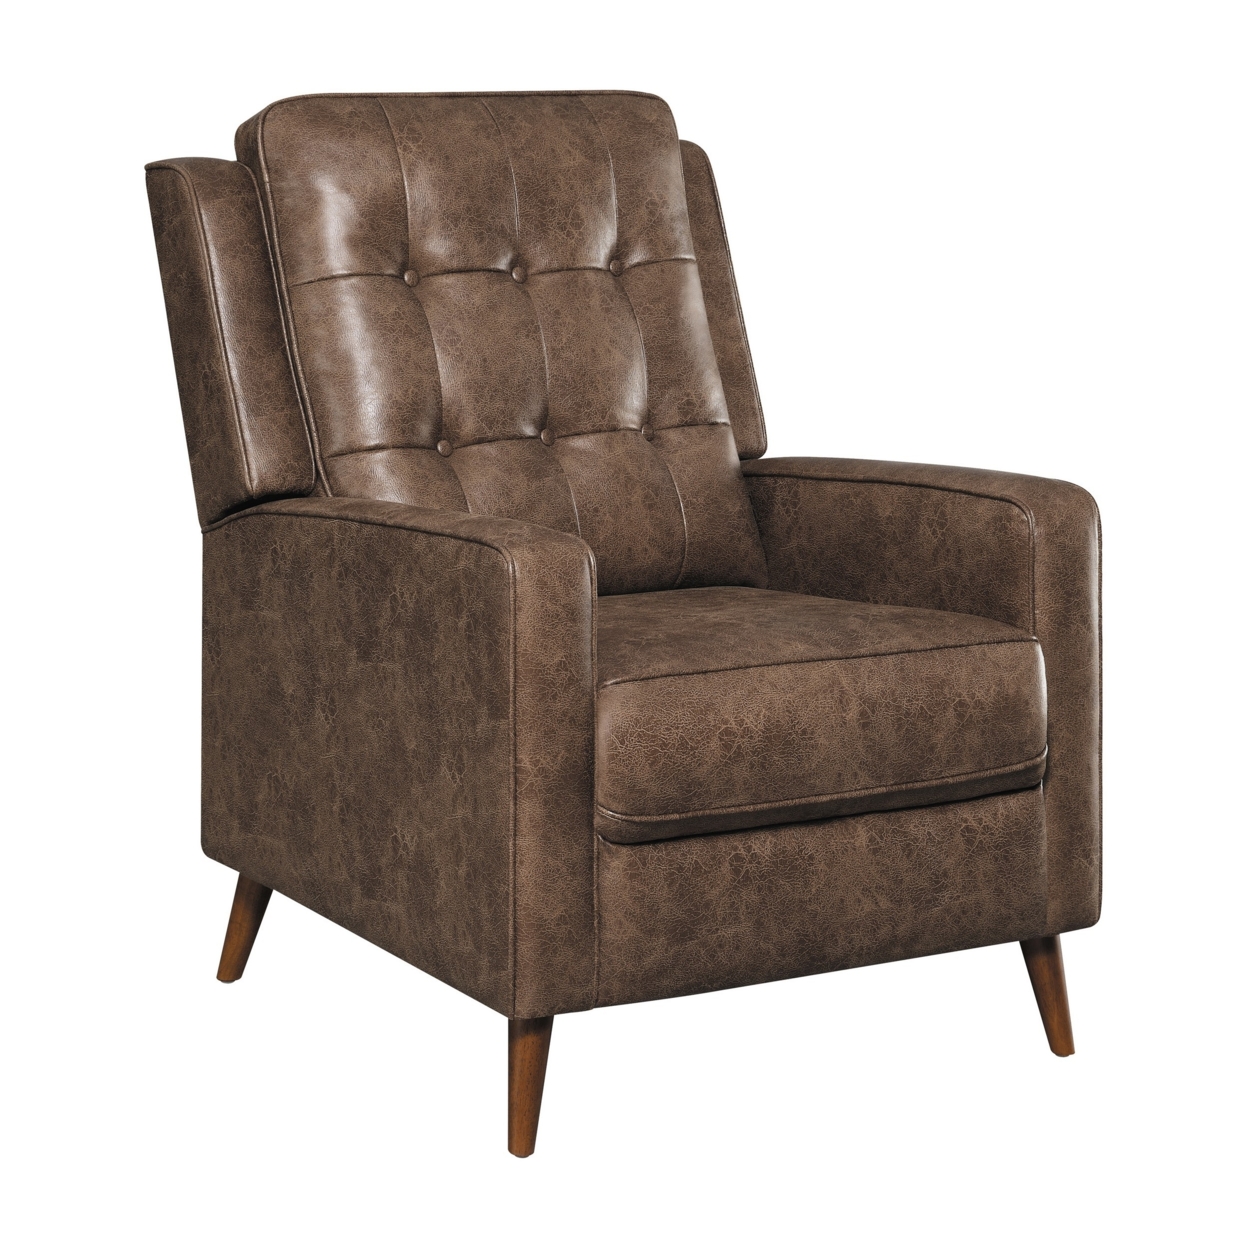 31 Inch Push Back Recliner, Tufted, Tapered Legs, Rich Brown Faux Leather- Saltoro Sherpi